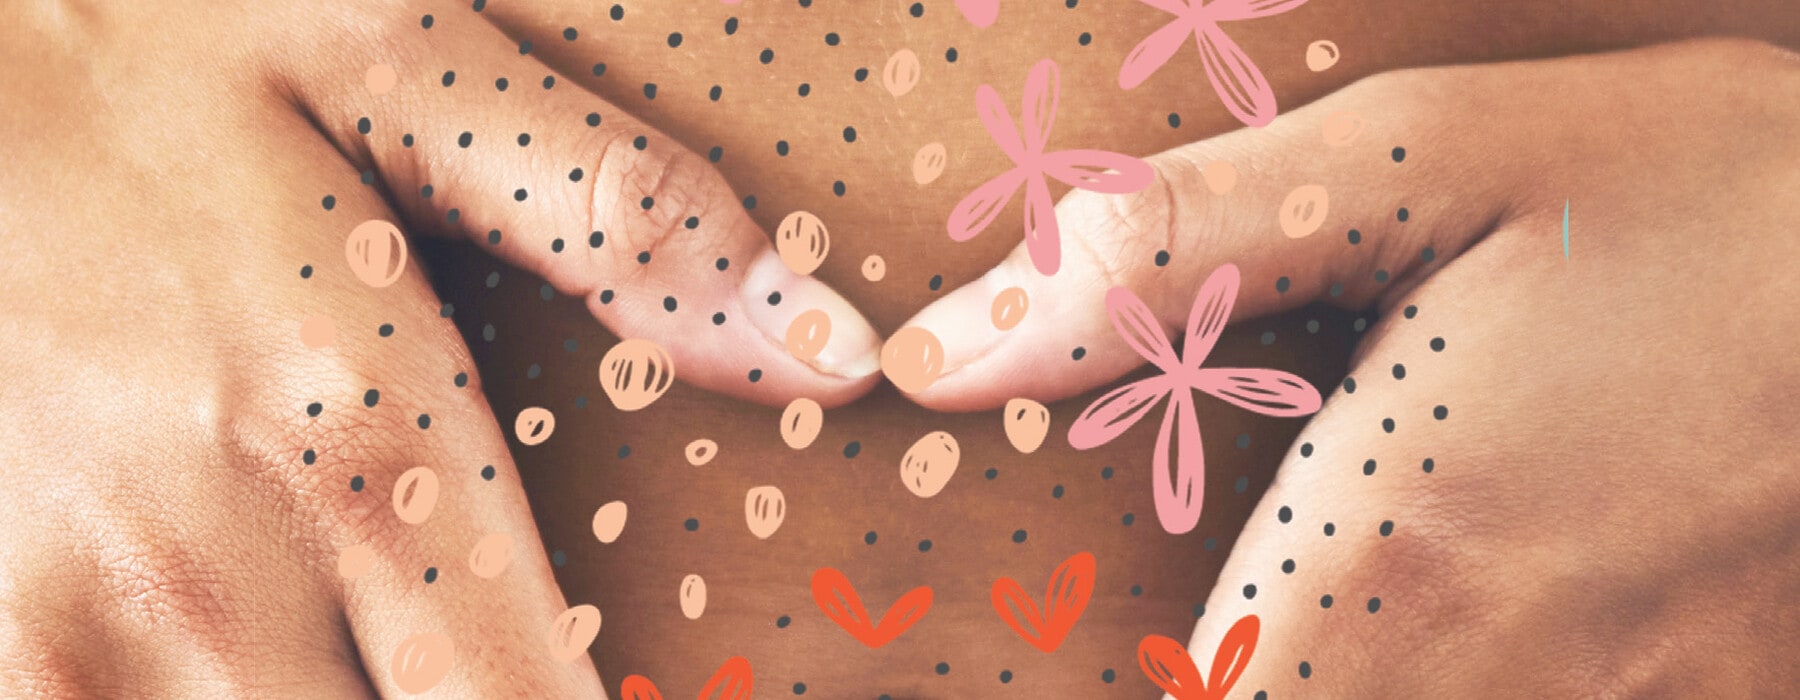 Close up of woman's hands holding stomach with drawings of hearts and flowers